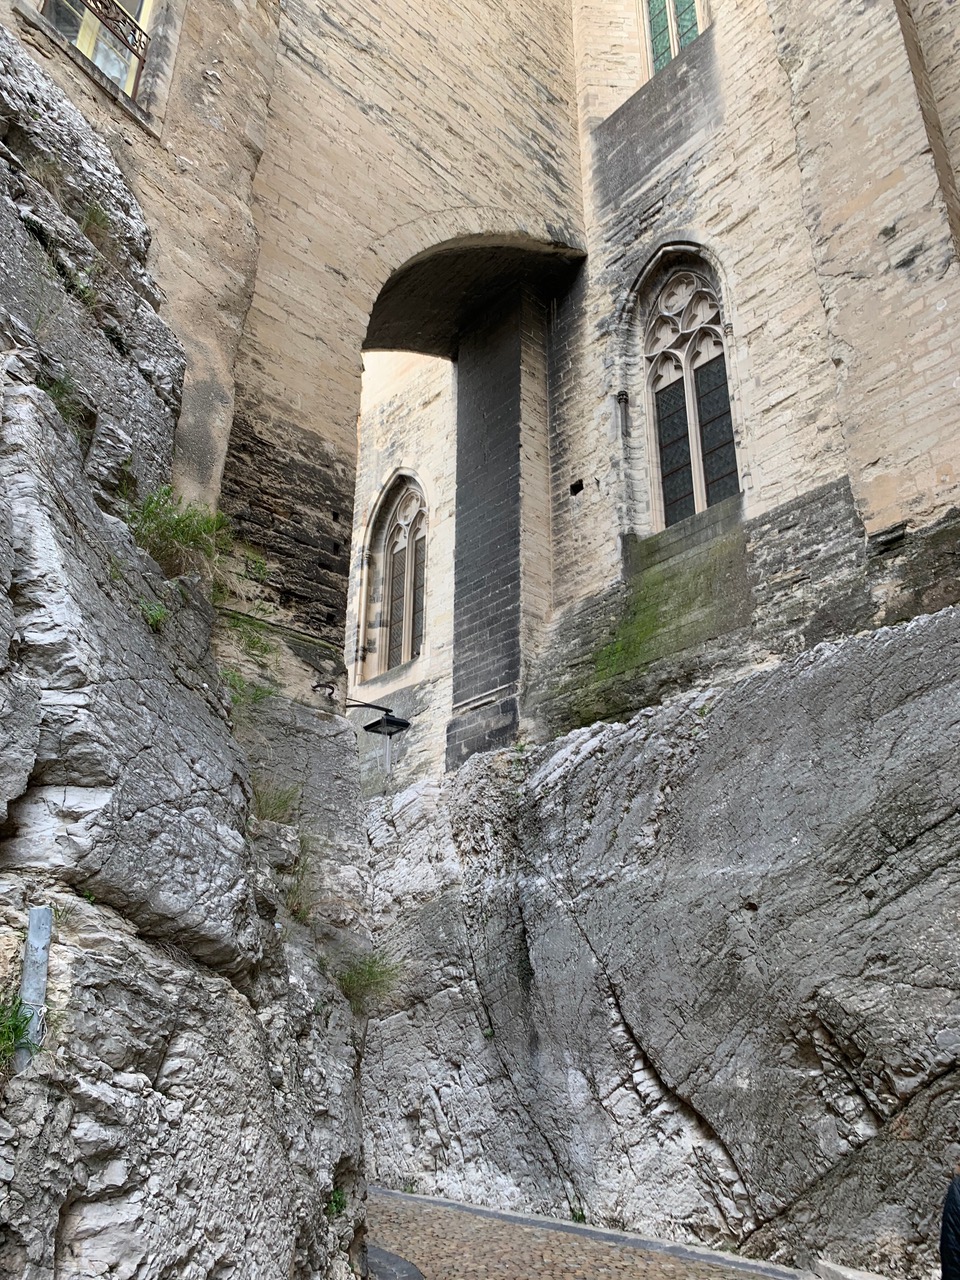 The palace of the popes built into the bedrock with an arch across a narrow street